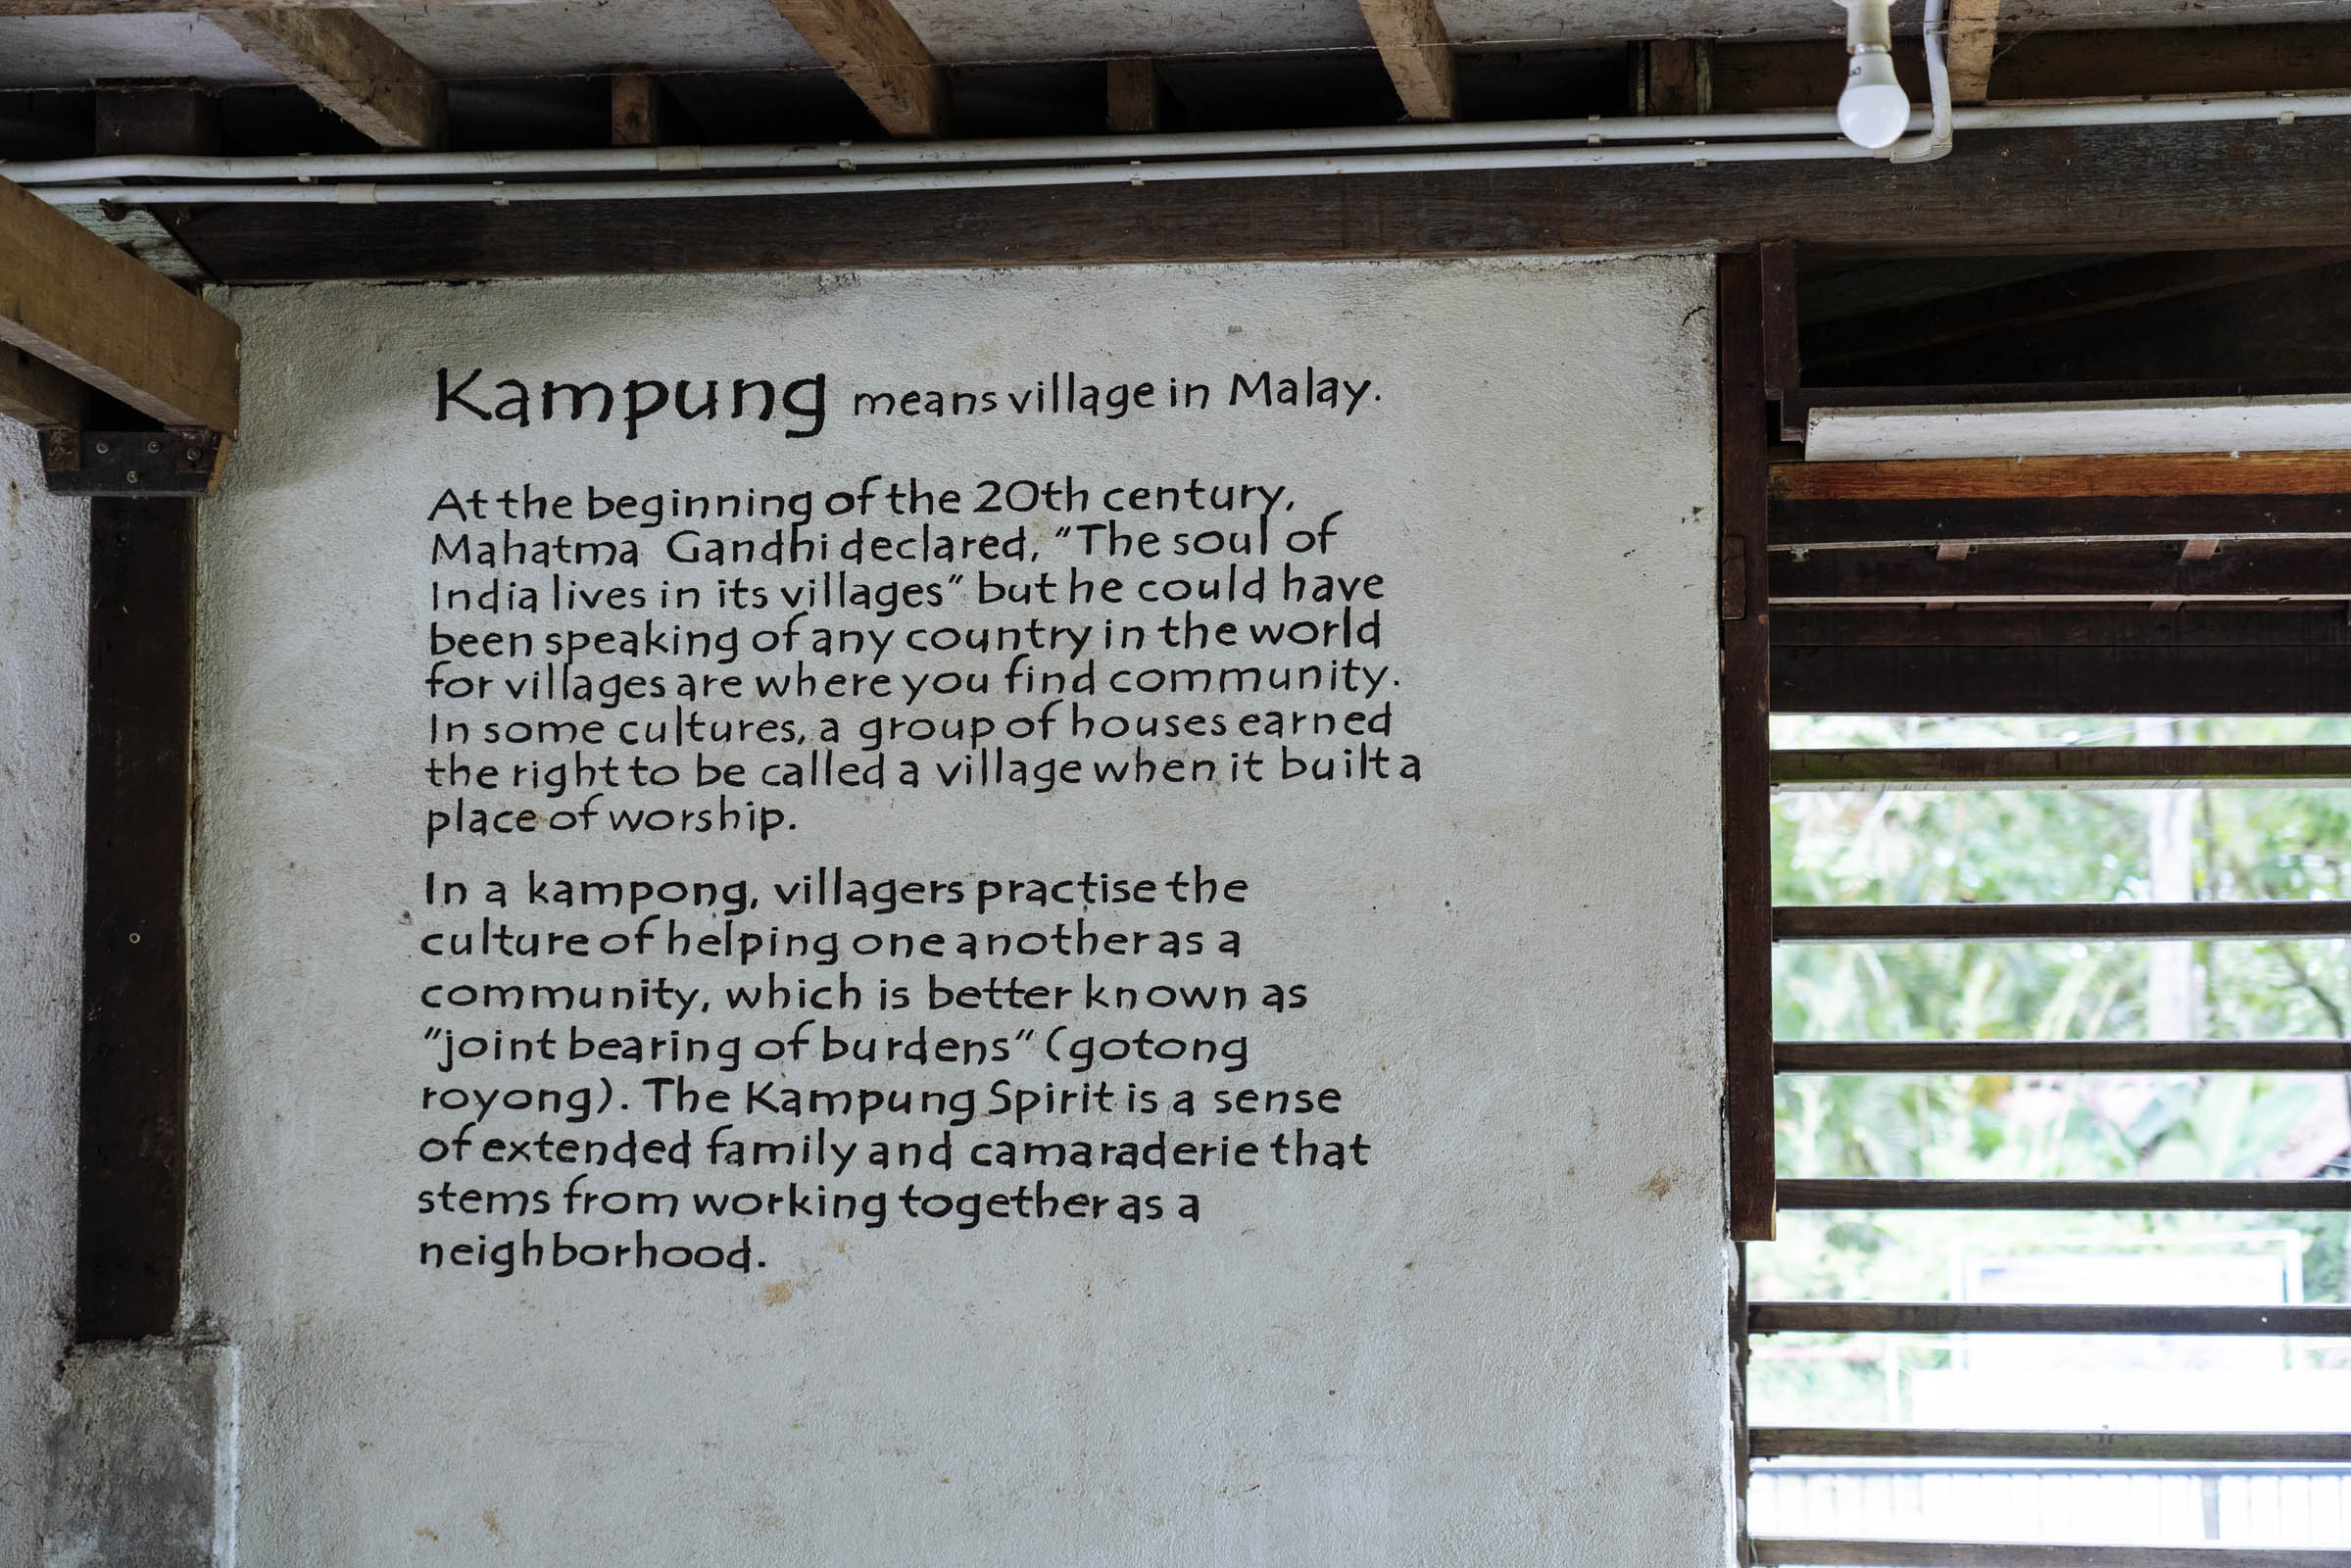 A signboard on kampung spirit, or community culture, at Earth Camp. Photo by Teoh Eng Hooi.